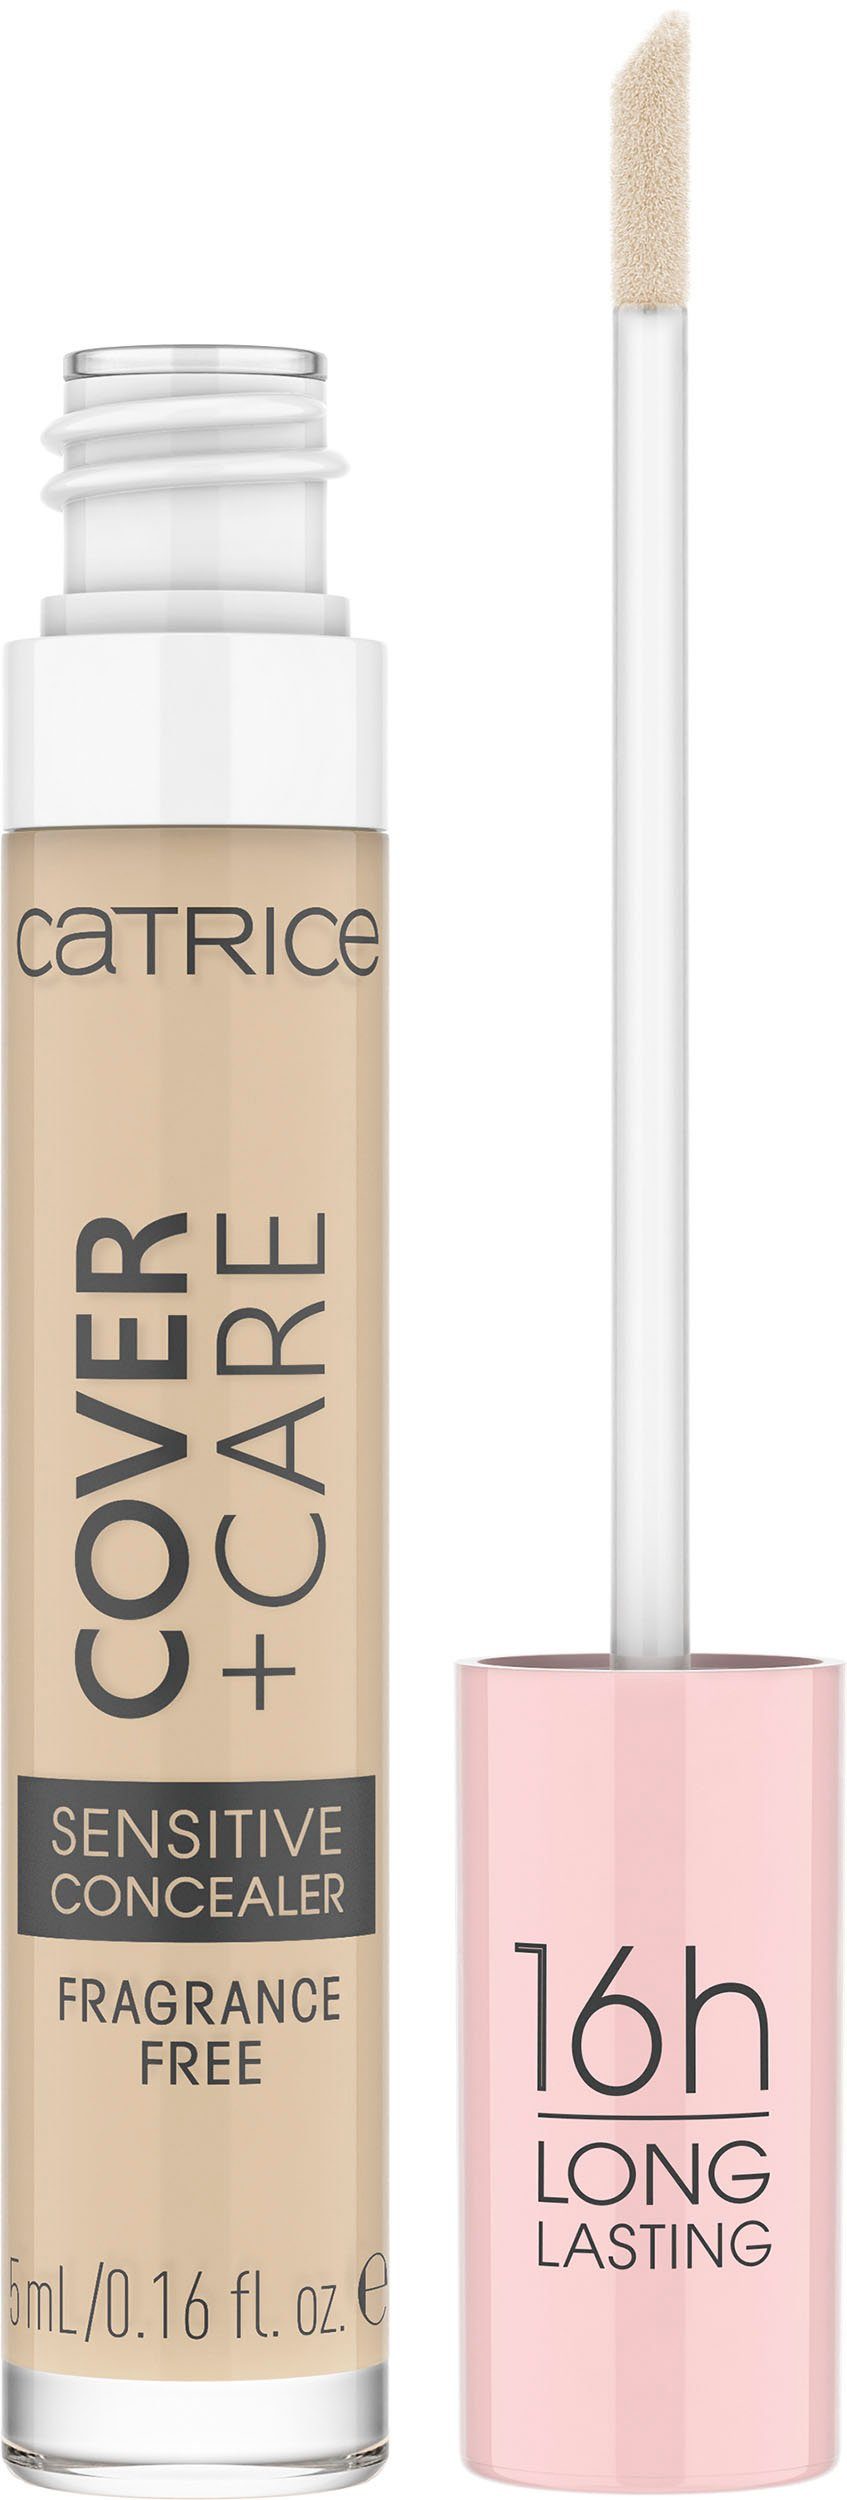 Catrice Concealer Catrice 3-tlg. + Sensitive Concealer, nude Care 010C Cover